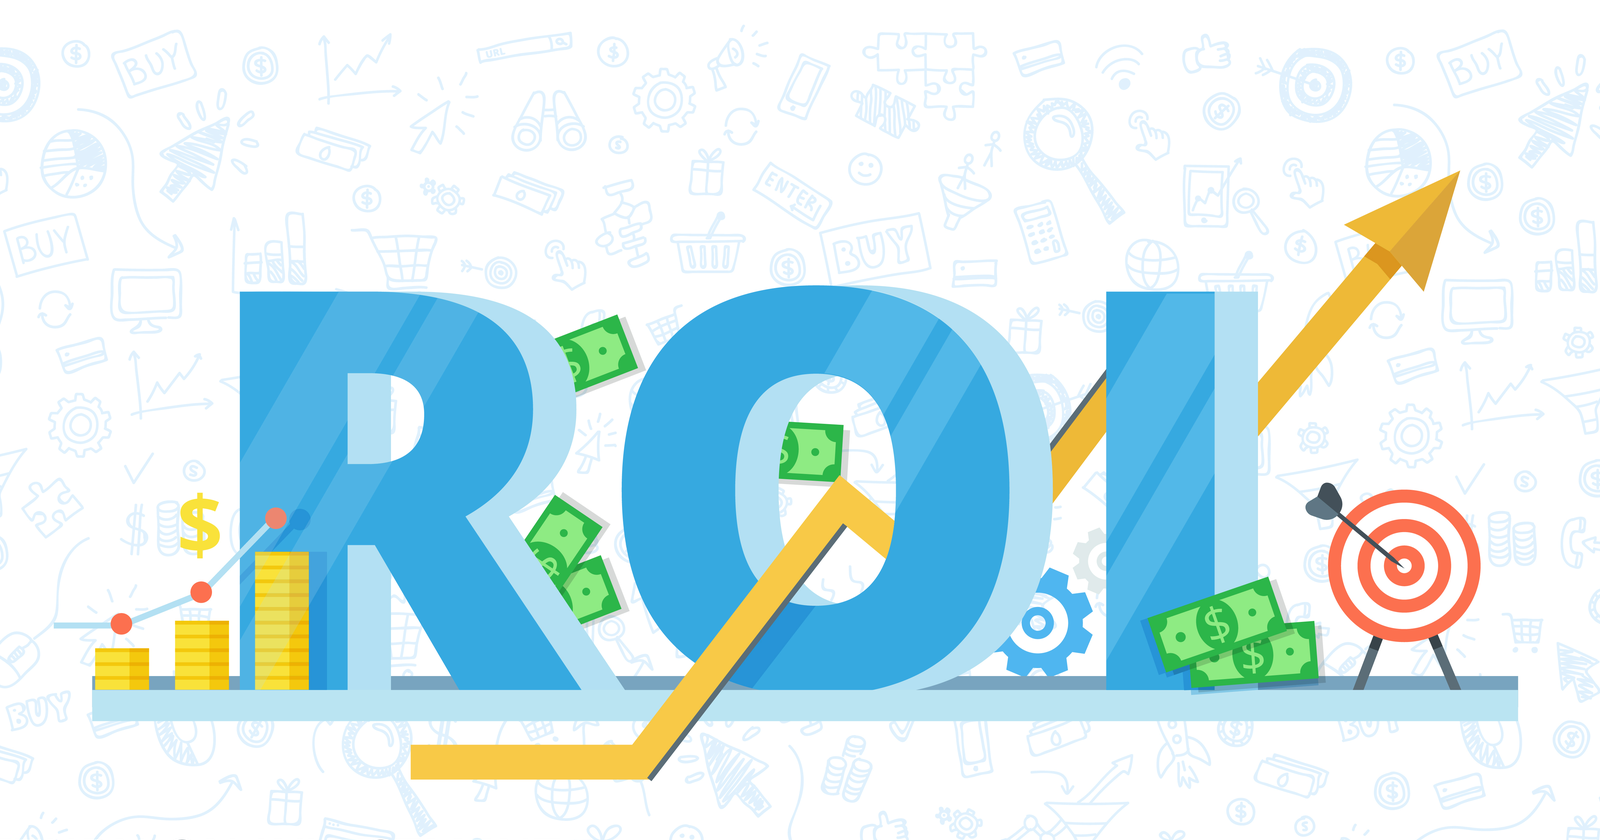 5 Creative Ways to Boost Your Content Marketing ROI